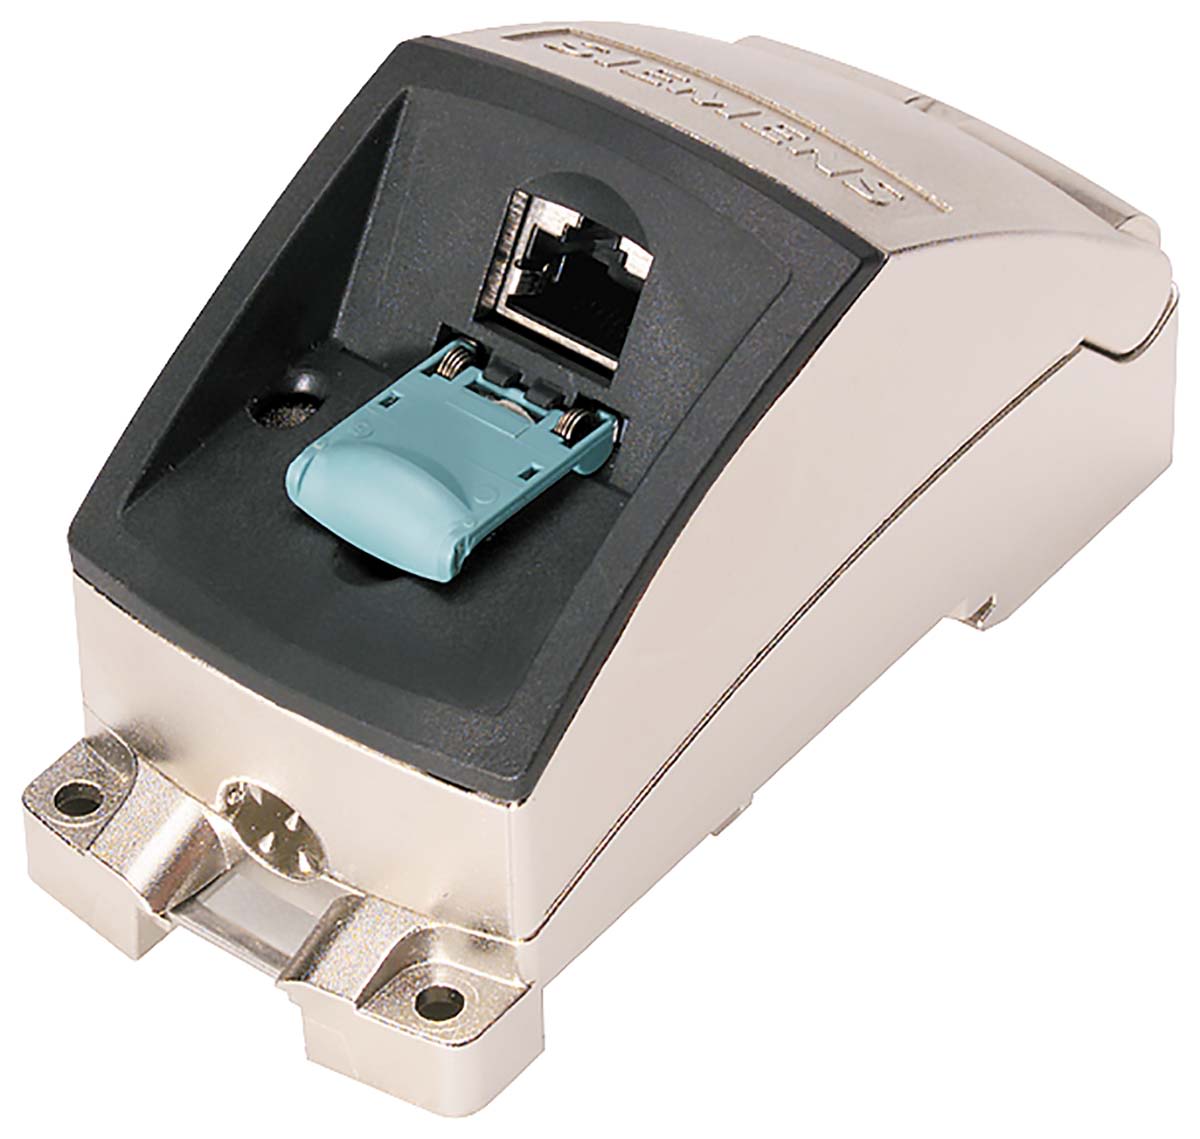 Siemens Data Acquisition Module for Use with Industrial Ethernet